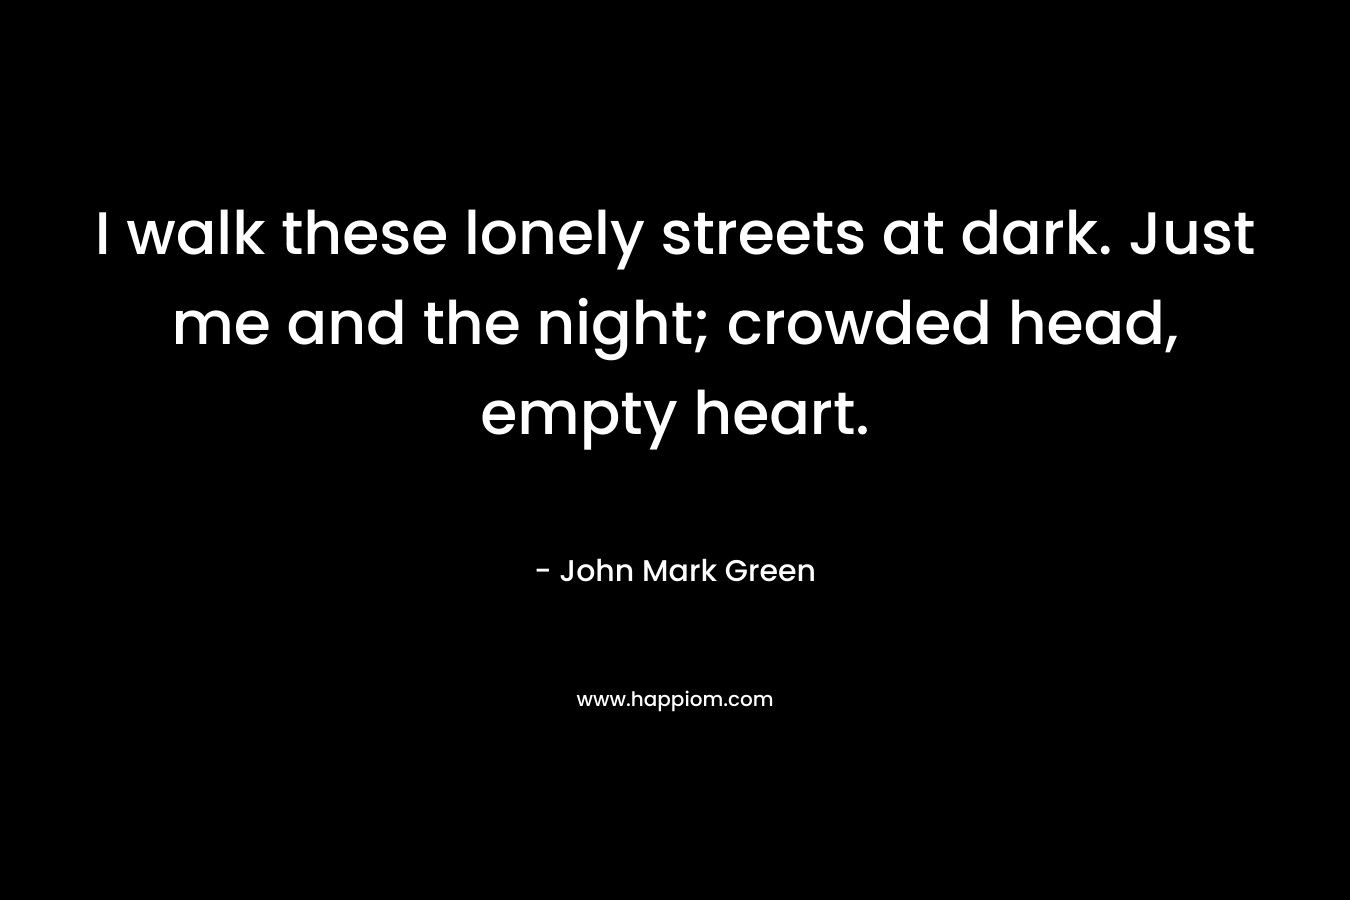 I walk these lonely streets at dark. Just me and the night; crowded head, empty heart.